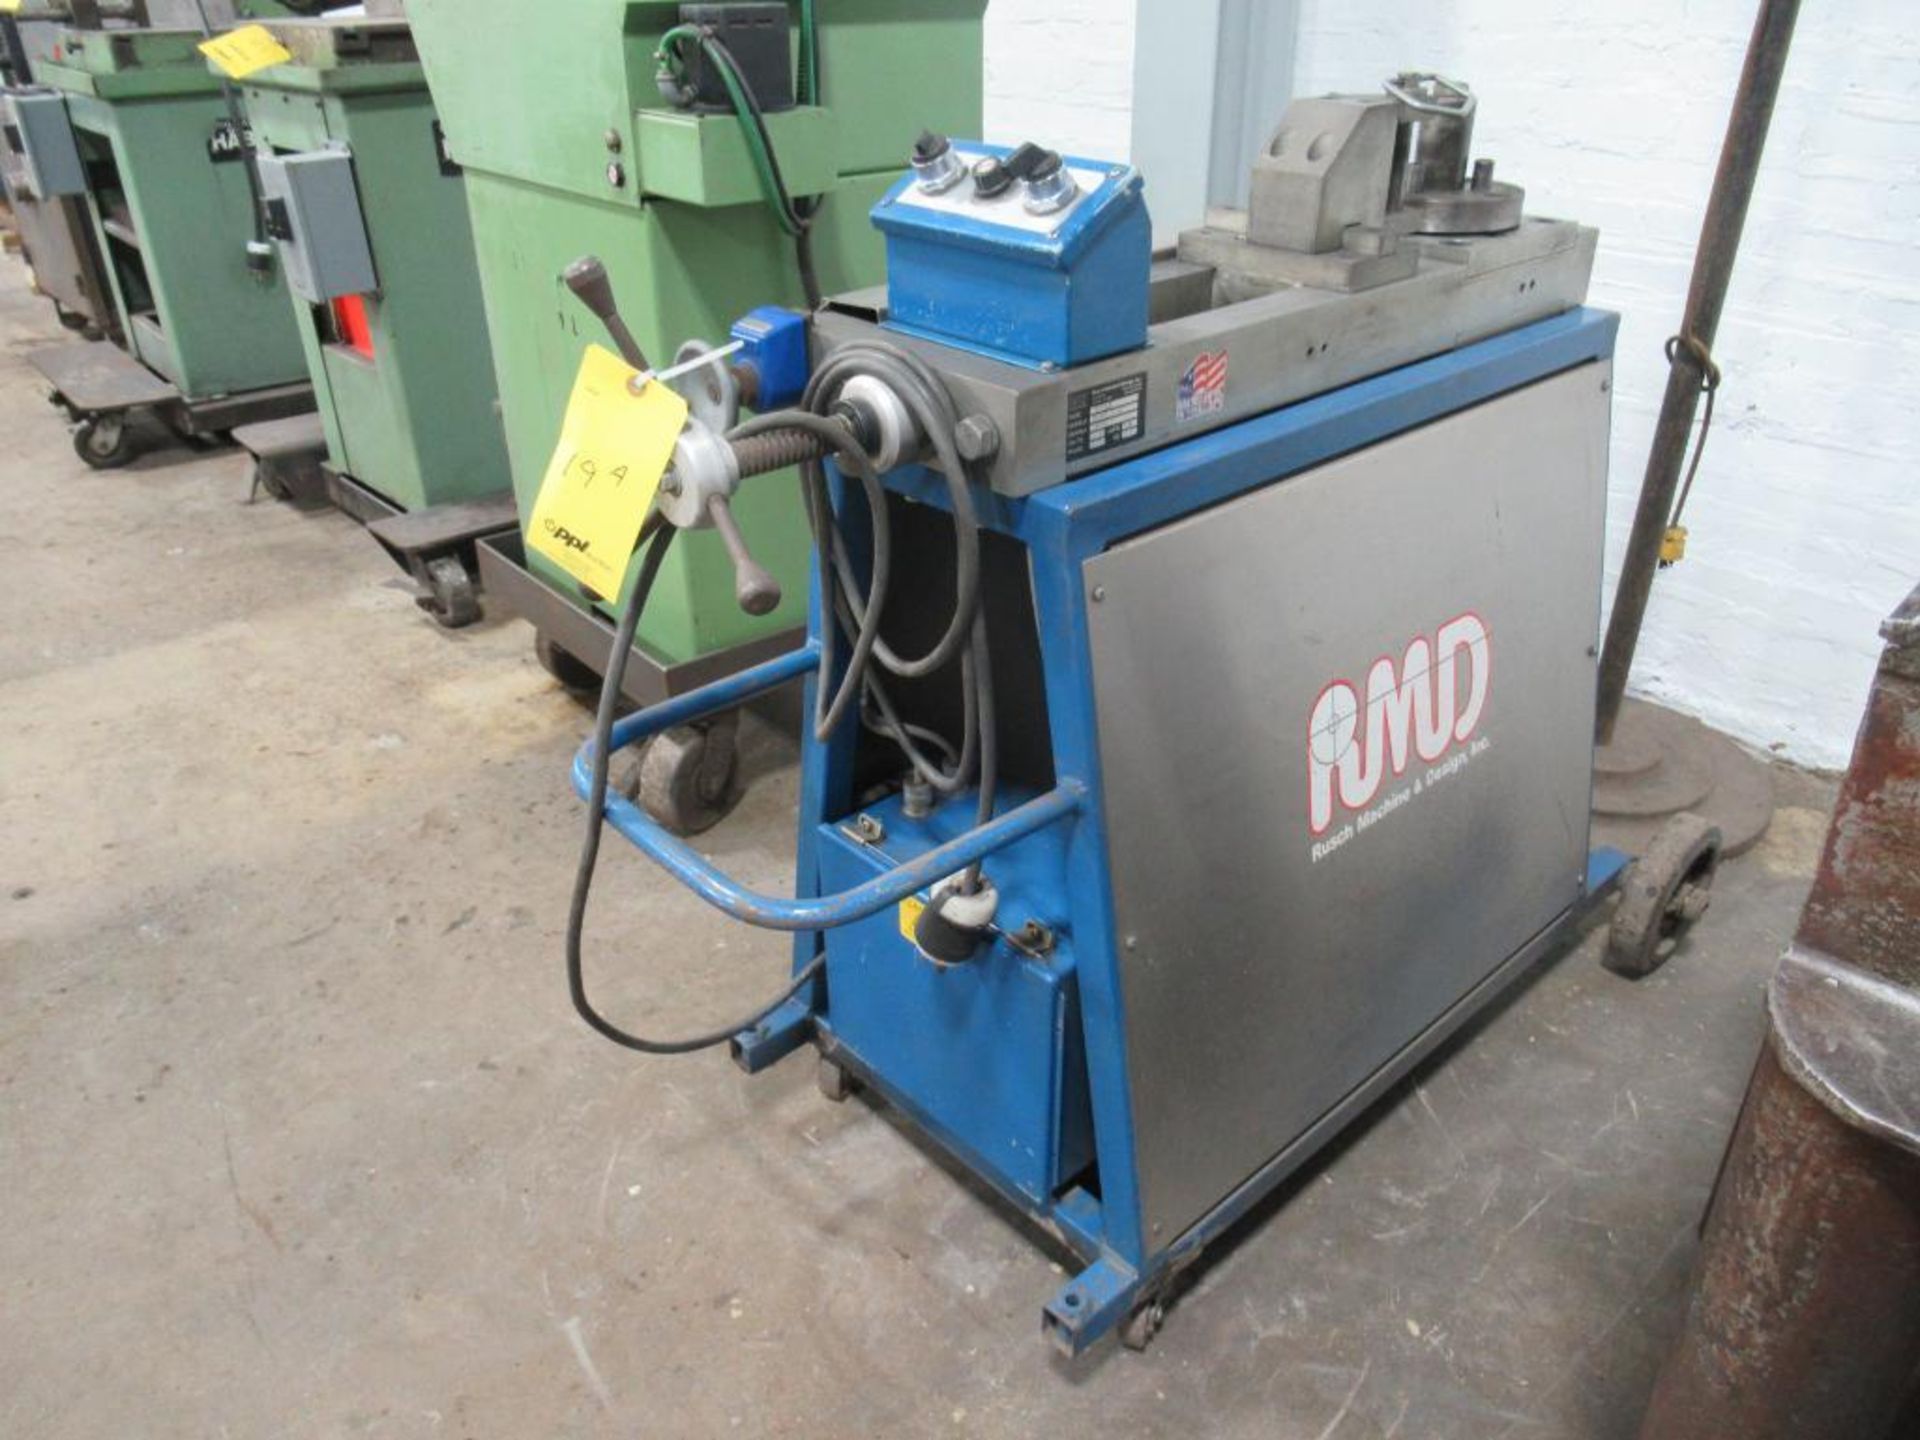 RMD 300 S Electric Rotary Draw Pipe and Tubing Bender, 220 Volt, S/N 200